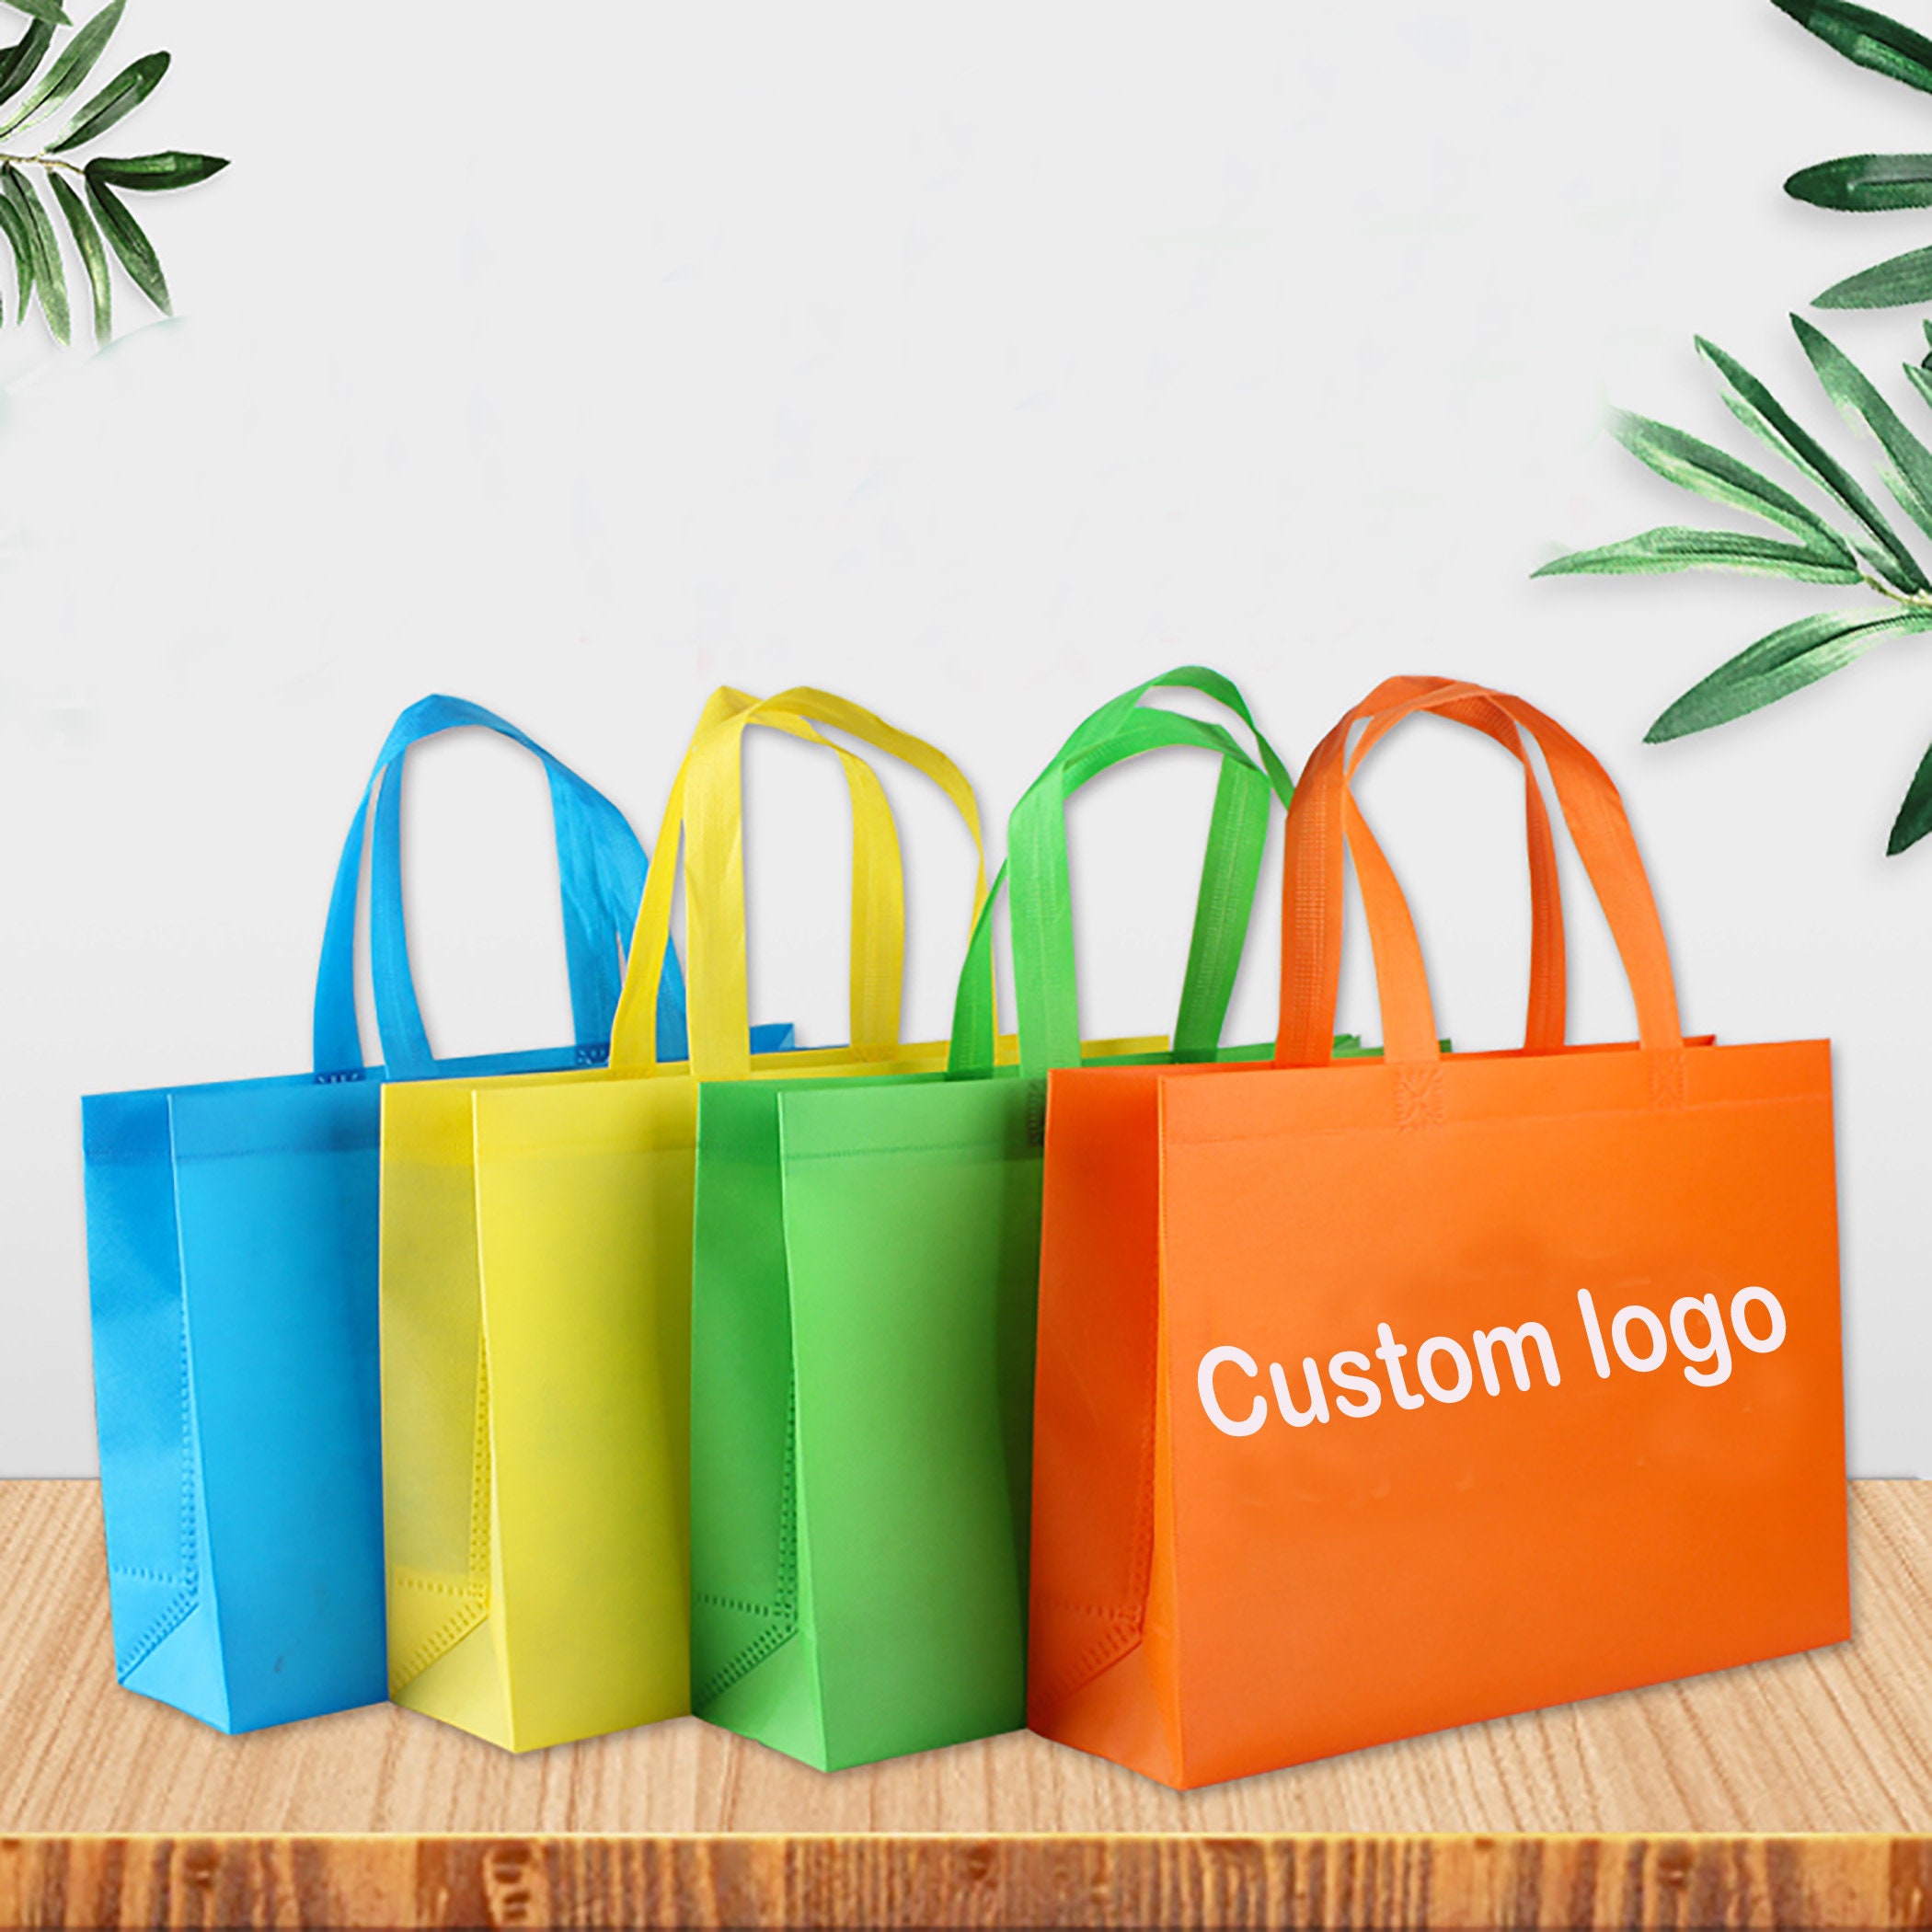 Reusable Bags With Glow Ink Bring Logos to Life